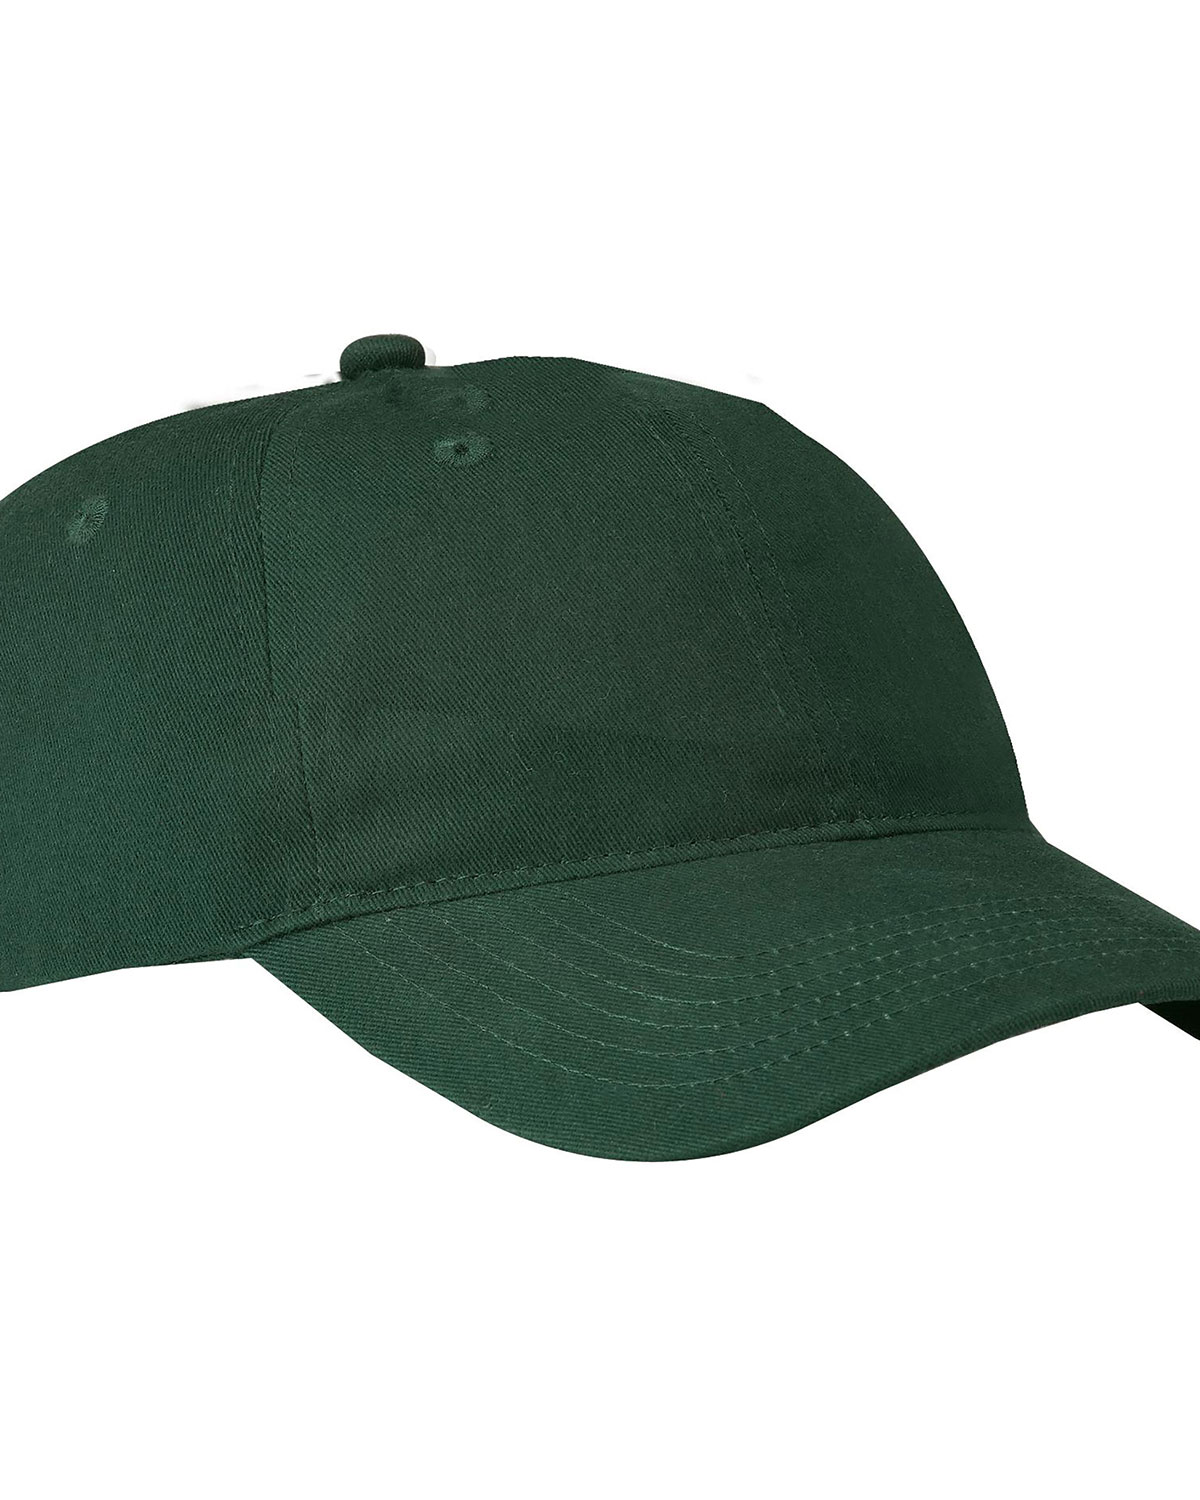 Port Authority CP77 Men - Brushed Twill Low Profile Cap at Apparelstation